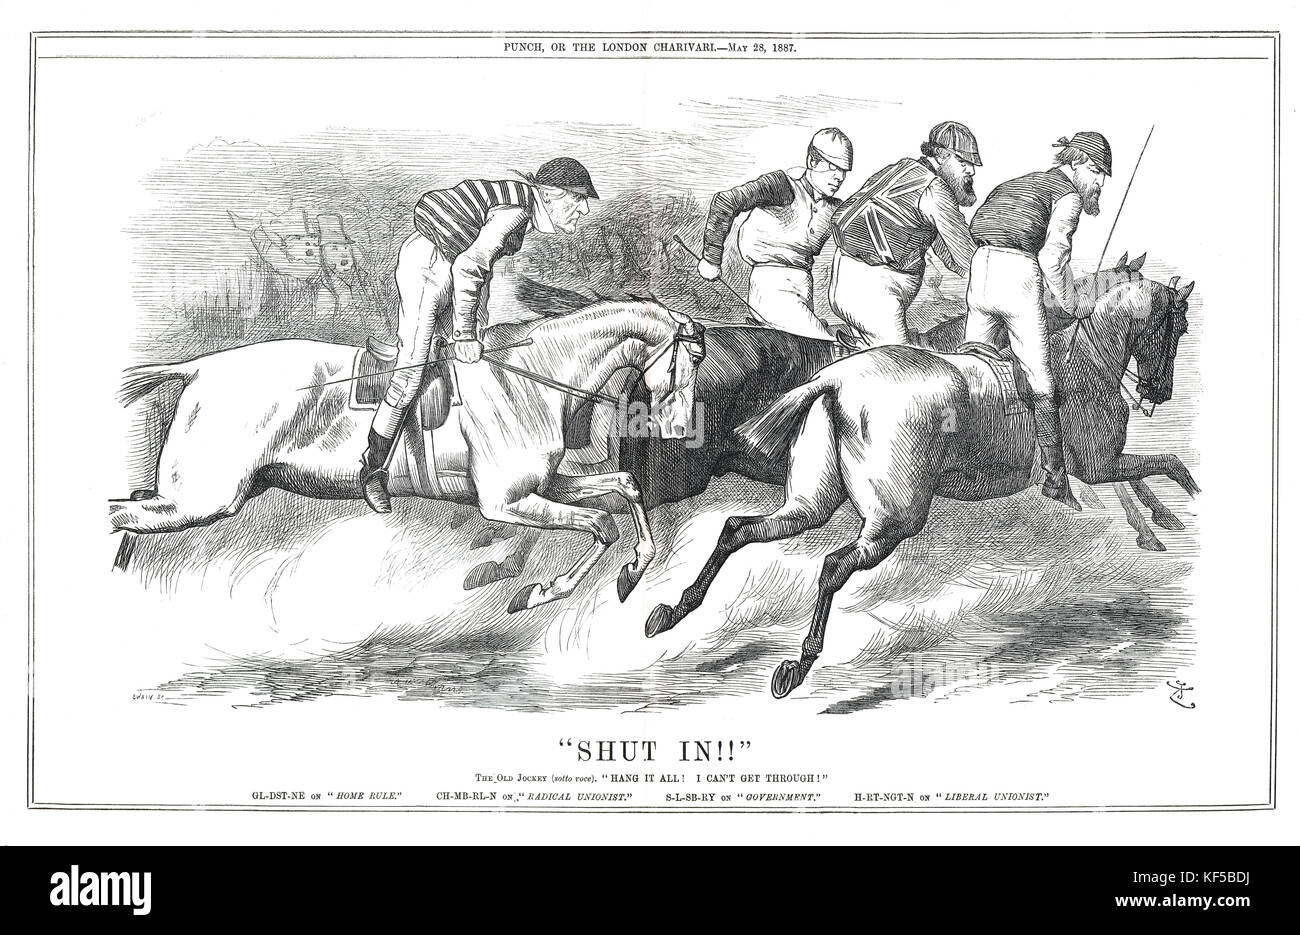 Gladstone on Home Rule, shut in. 1887 Punch cartoon Horse racing analogy showing politicians as jockeys referencing the Liberal party spilt of 1886. Stock Photo